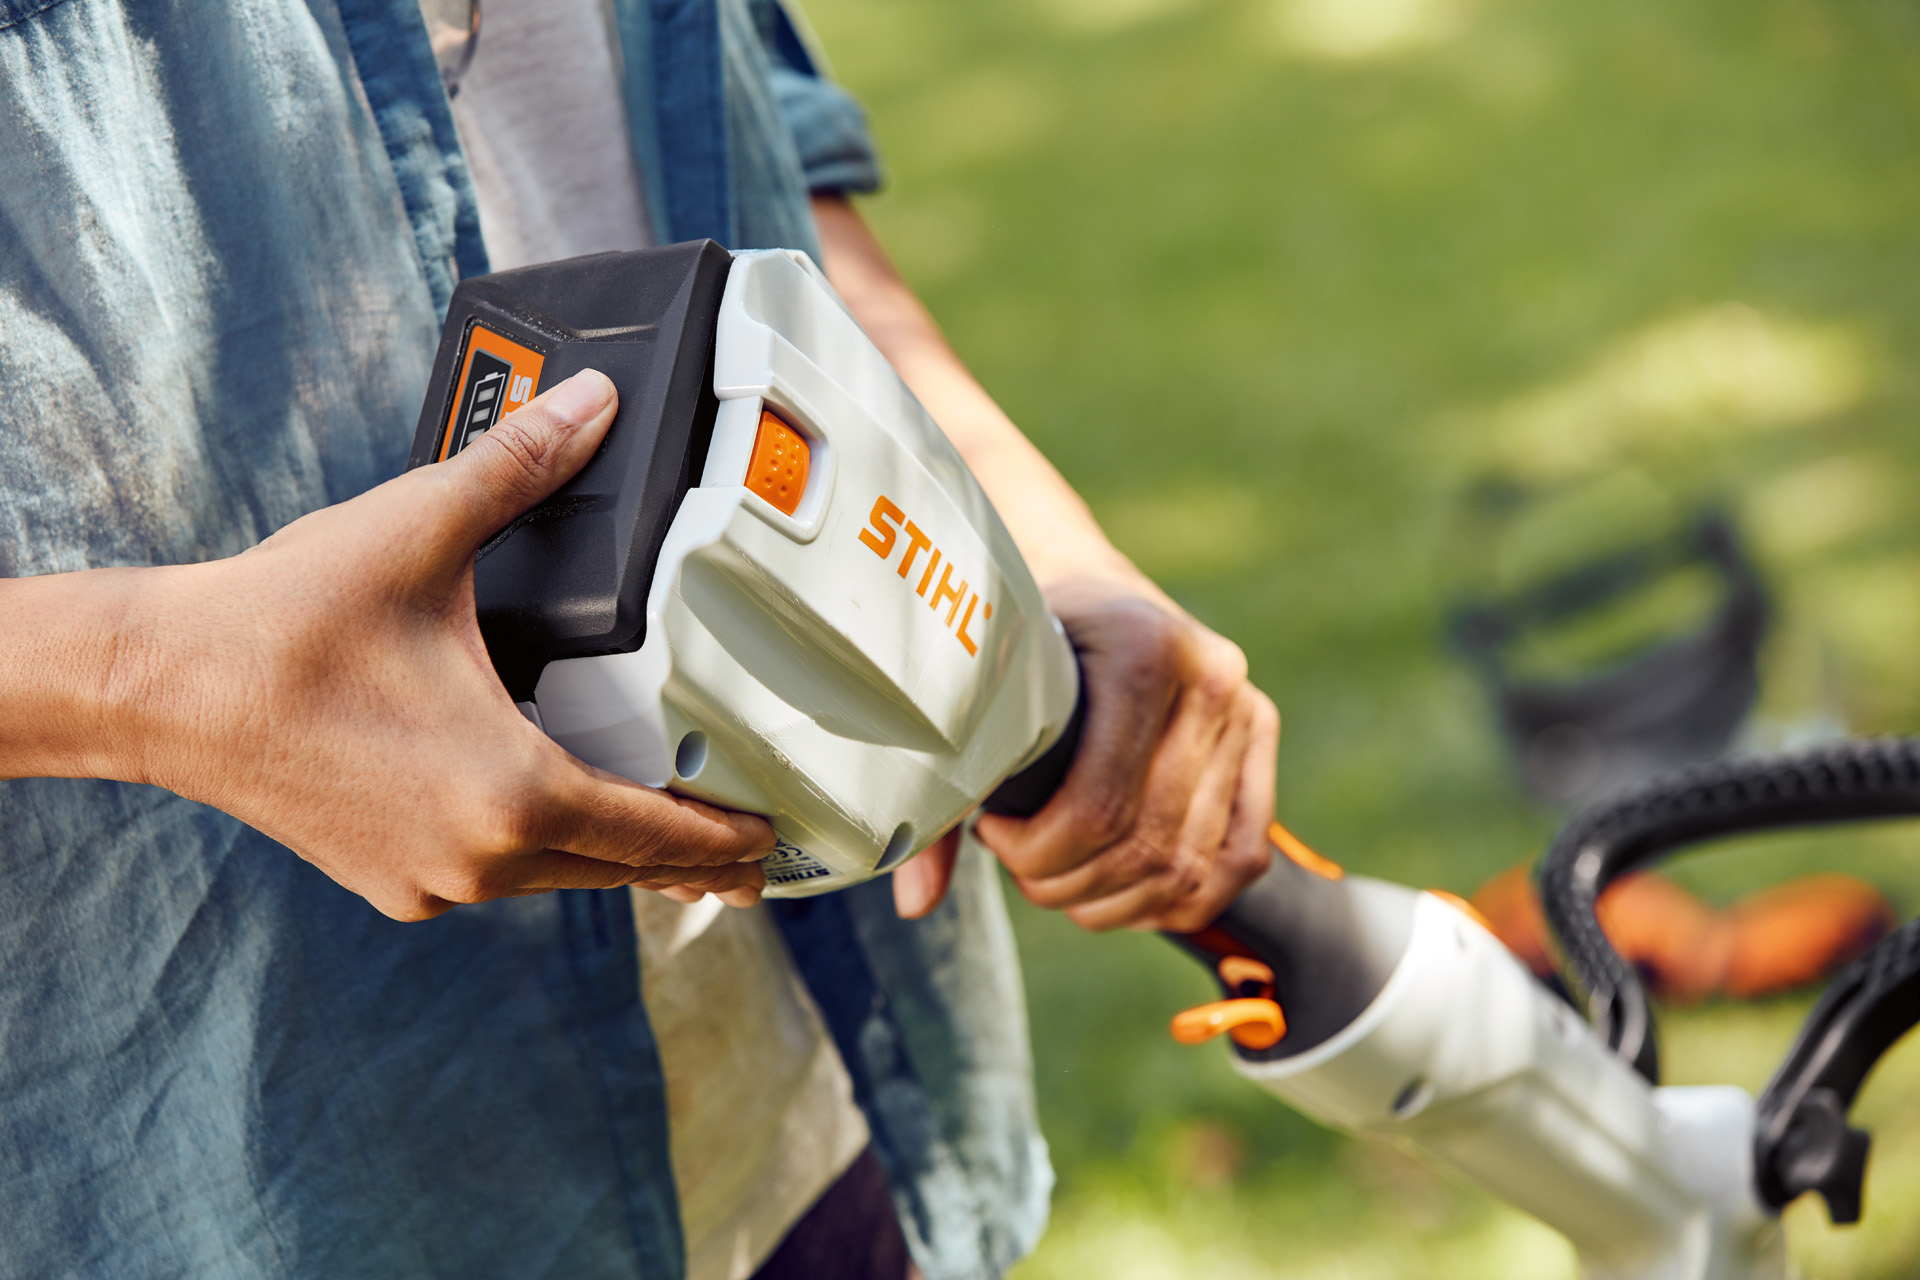 A person holds the STIHL FSA 56 battery-powered brush cutter in his hand and strokes the battery.